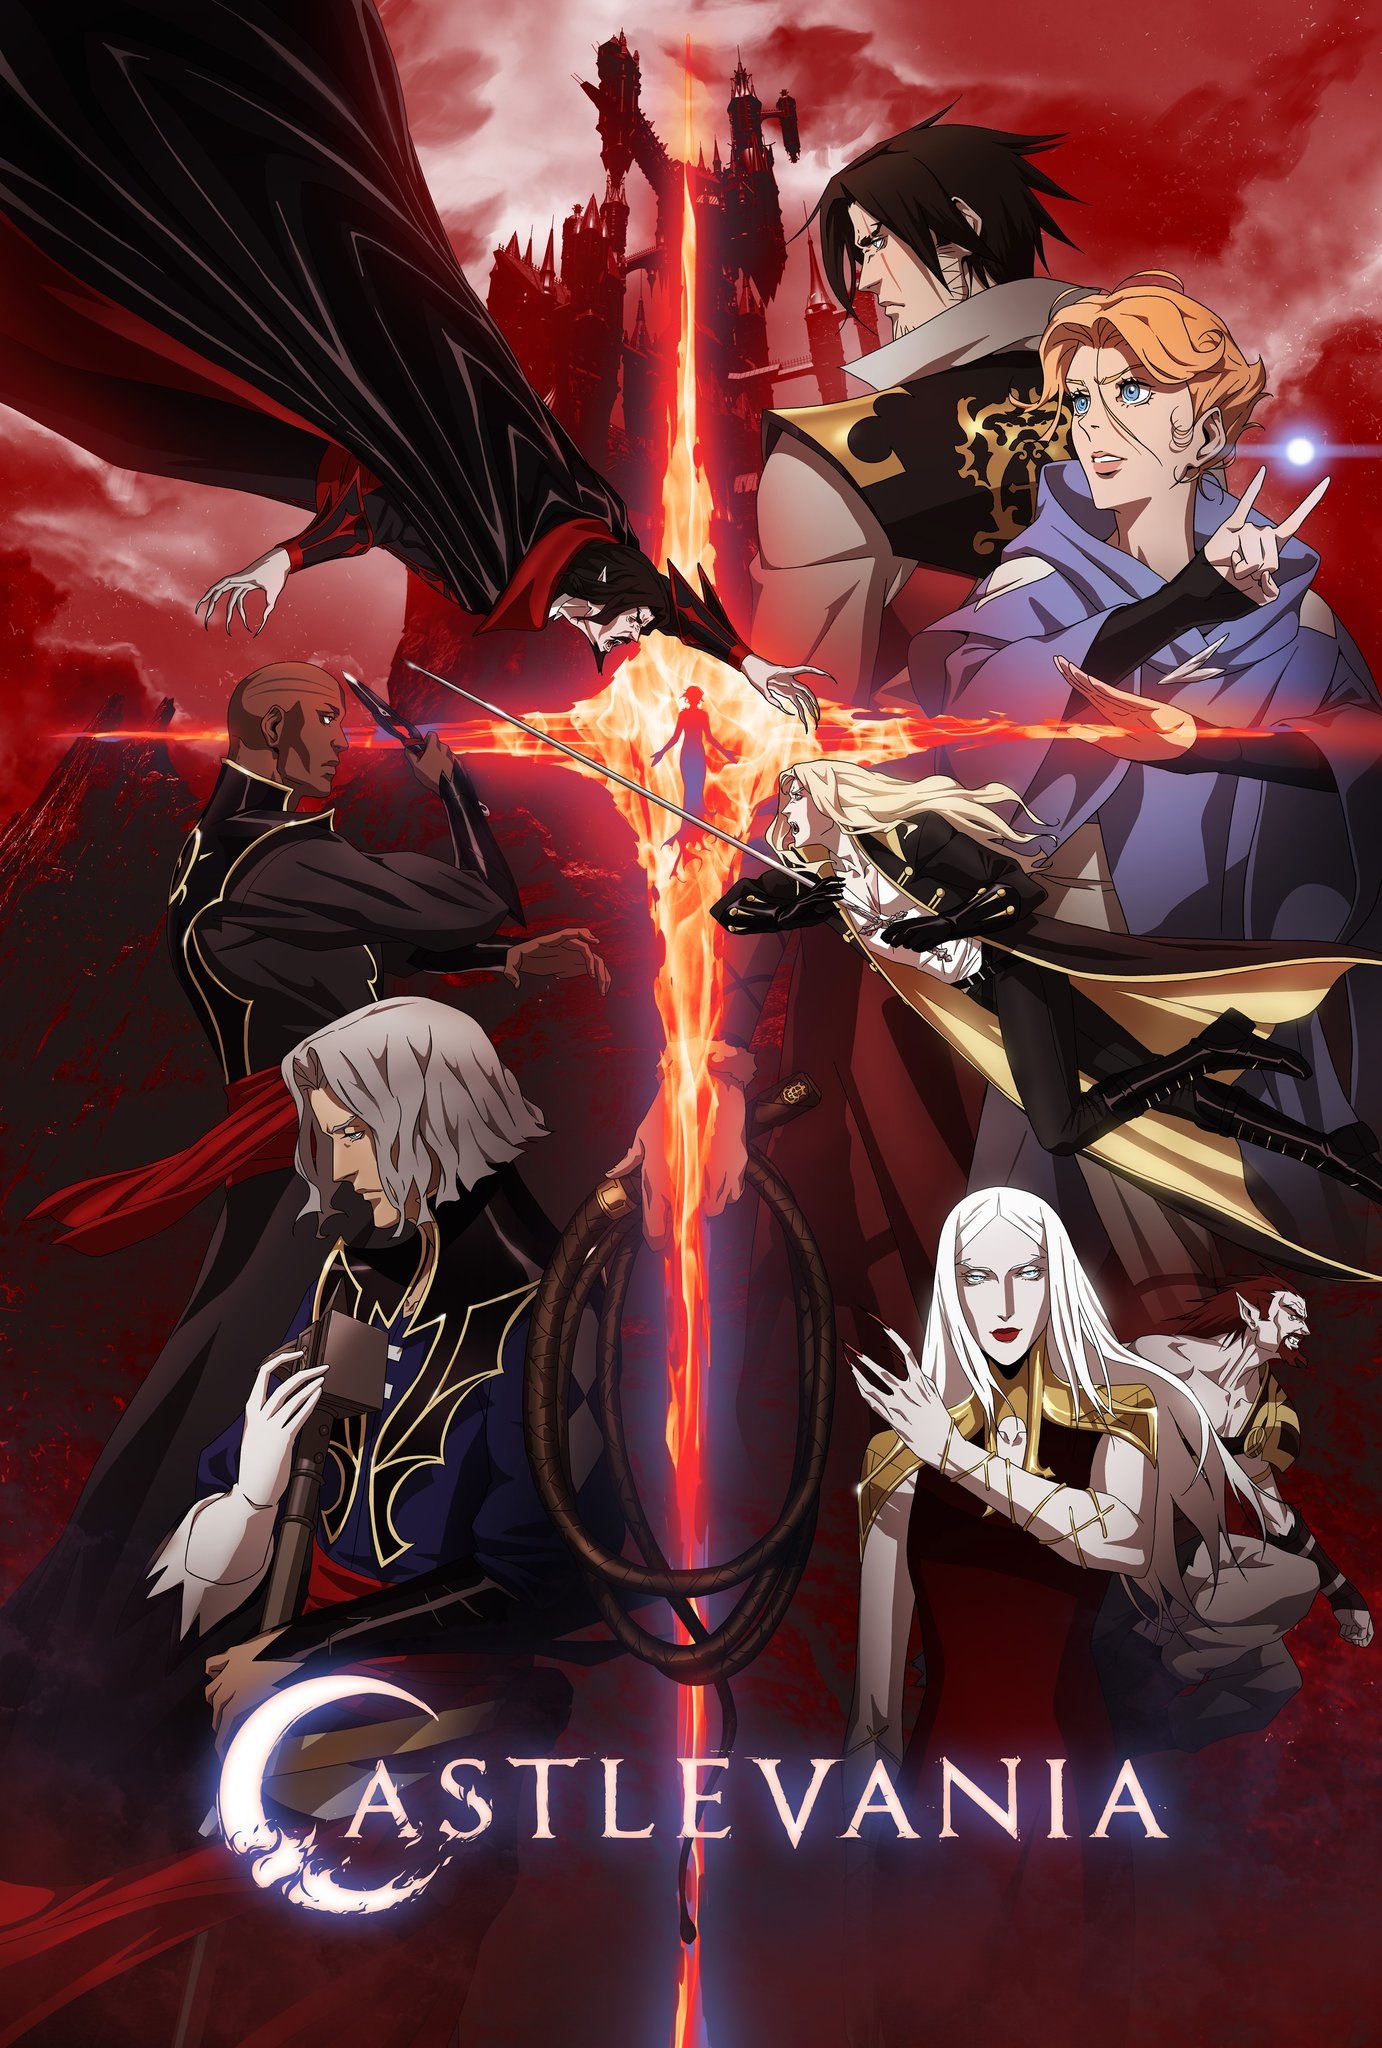 Whos your favorite Castlevania protagonist Aka any playable character   rcastlevania